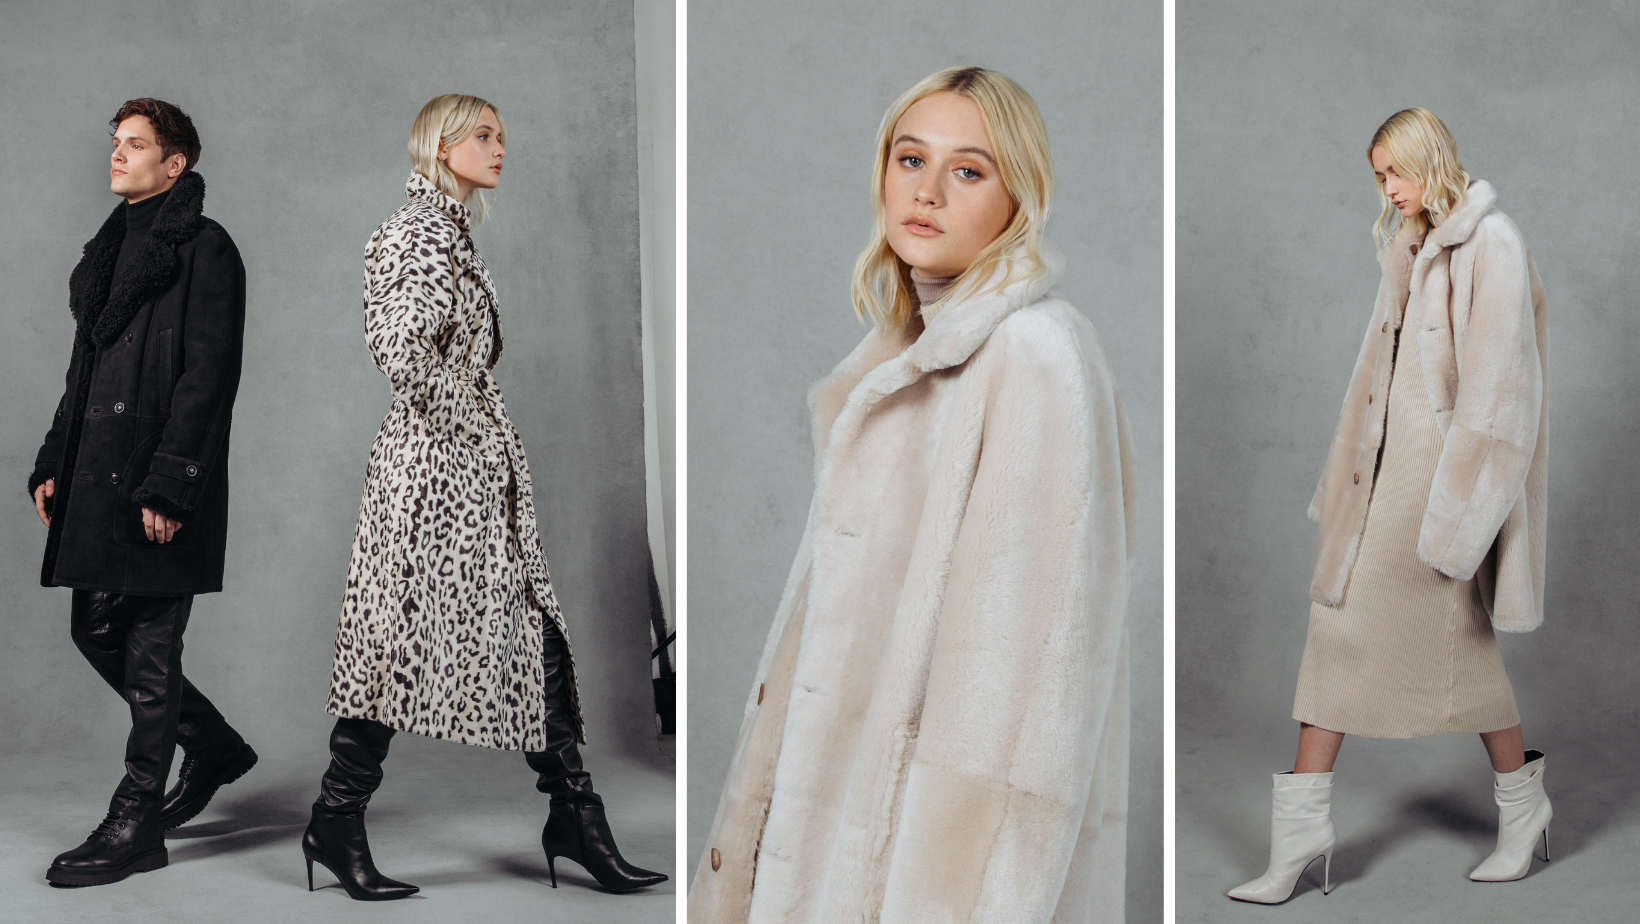 From left to right; Foster: reversible button-front Toscana coat, 35" long. Oversized spread collar. Comfortable fit in the shoulders and chest. Looser fit in the shoulders, chest and torso. 2158: Leopard, wrap style coat. 48' length Kimono sleeves and large notch collar. Molison: Cement Vintage Curly Suede. Fits true to size, Reversible, Comfortable fit in the shoulders and chest, straight cut through the torso when worn wool out, Fits trimmer when worn wool in, 35 inch Length Unisex.  